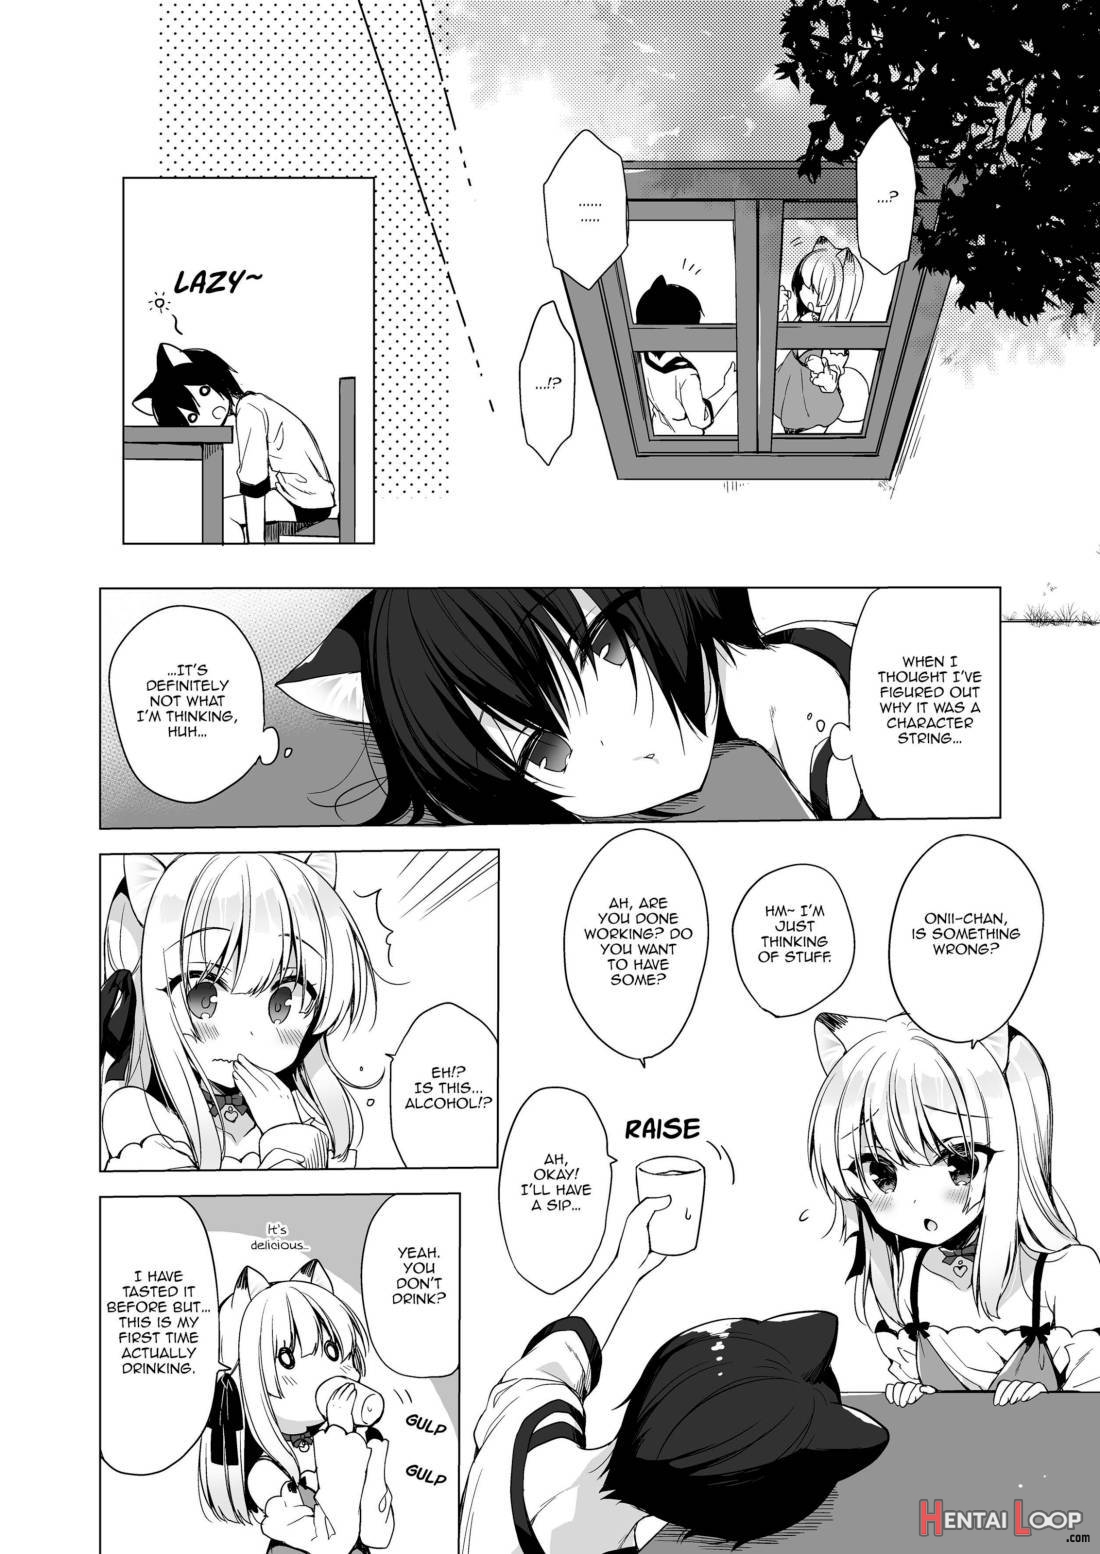 My Ideal Life in Another World Vol. 5 page 4